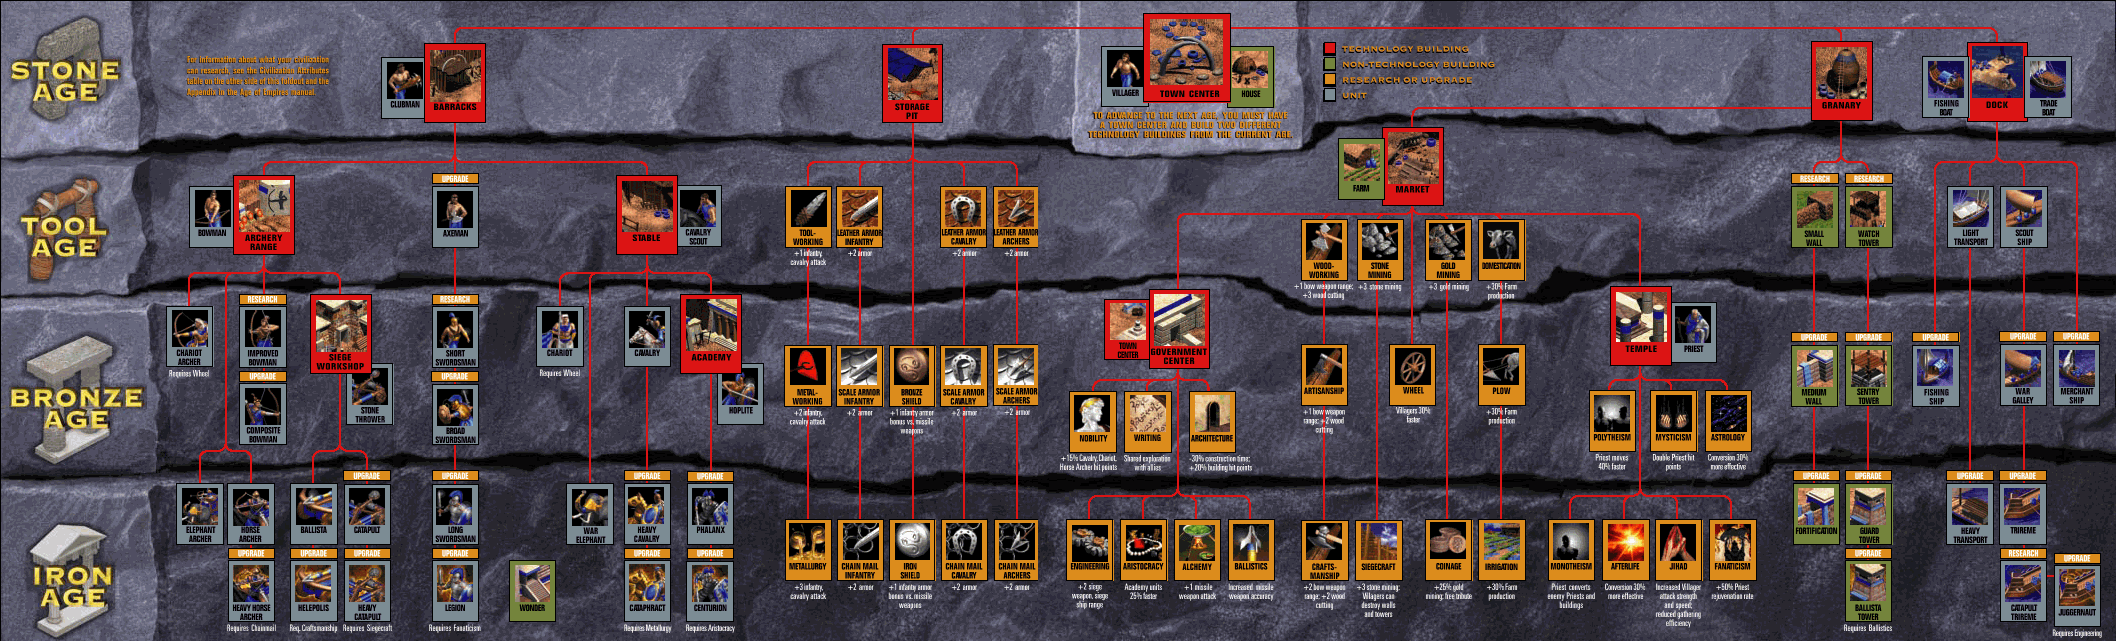 age of empires 2 tech tree